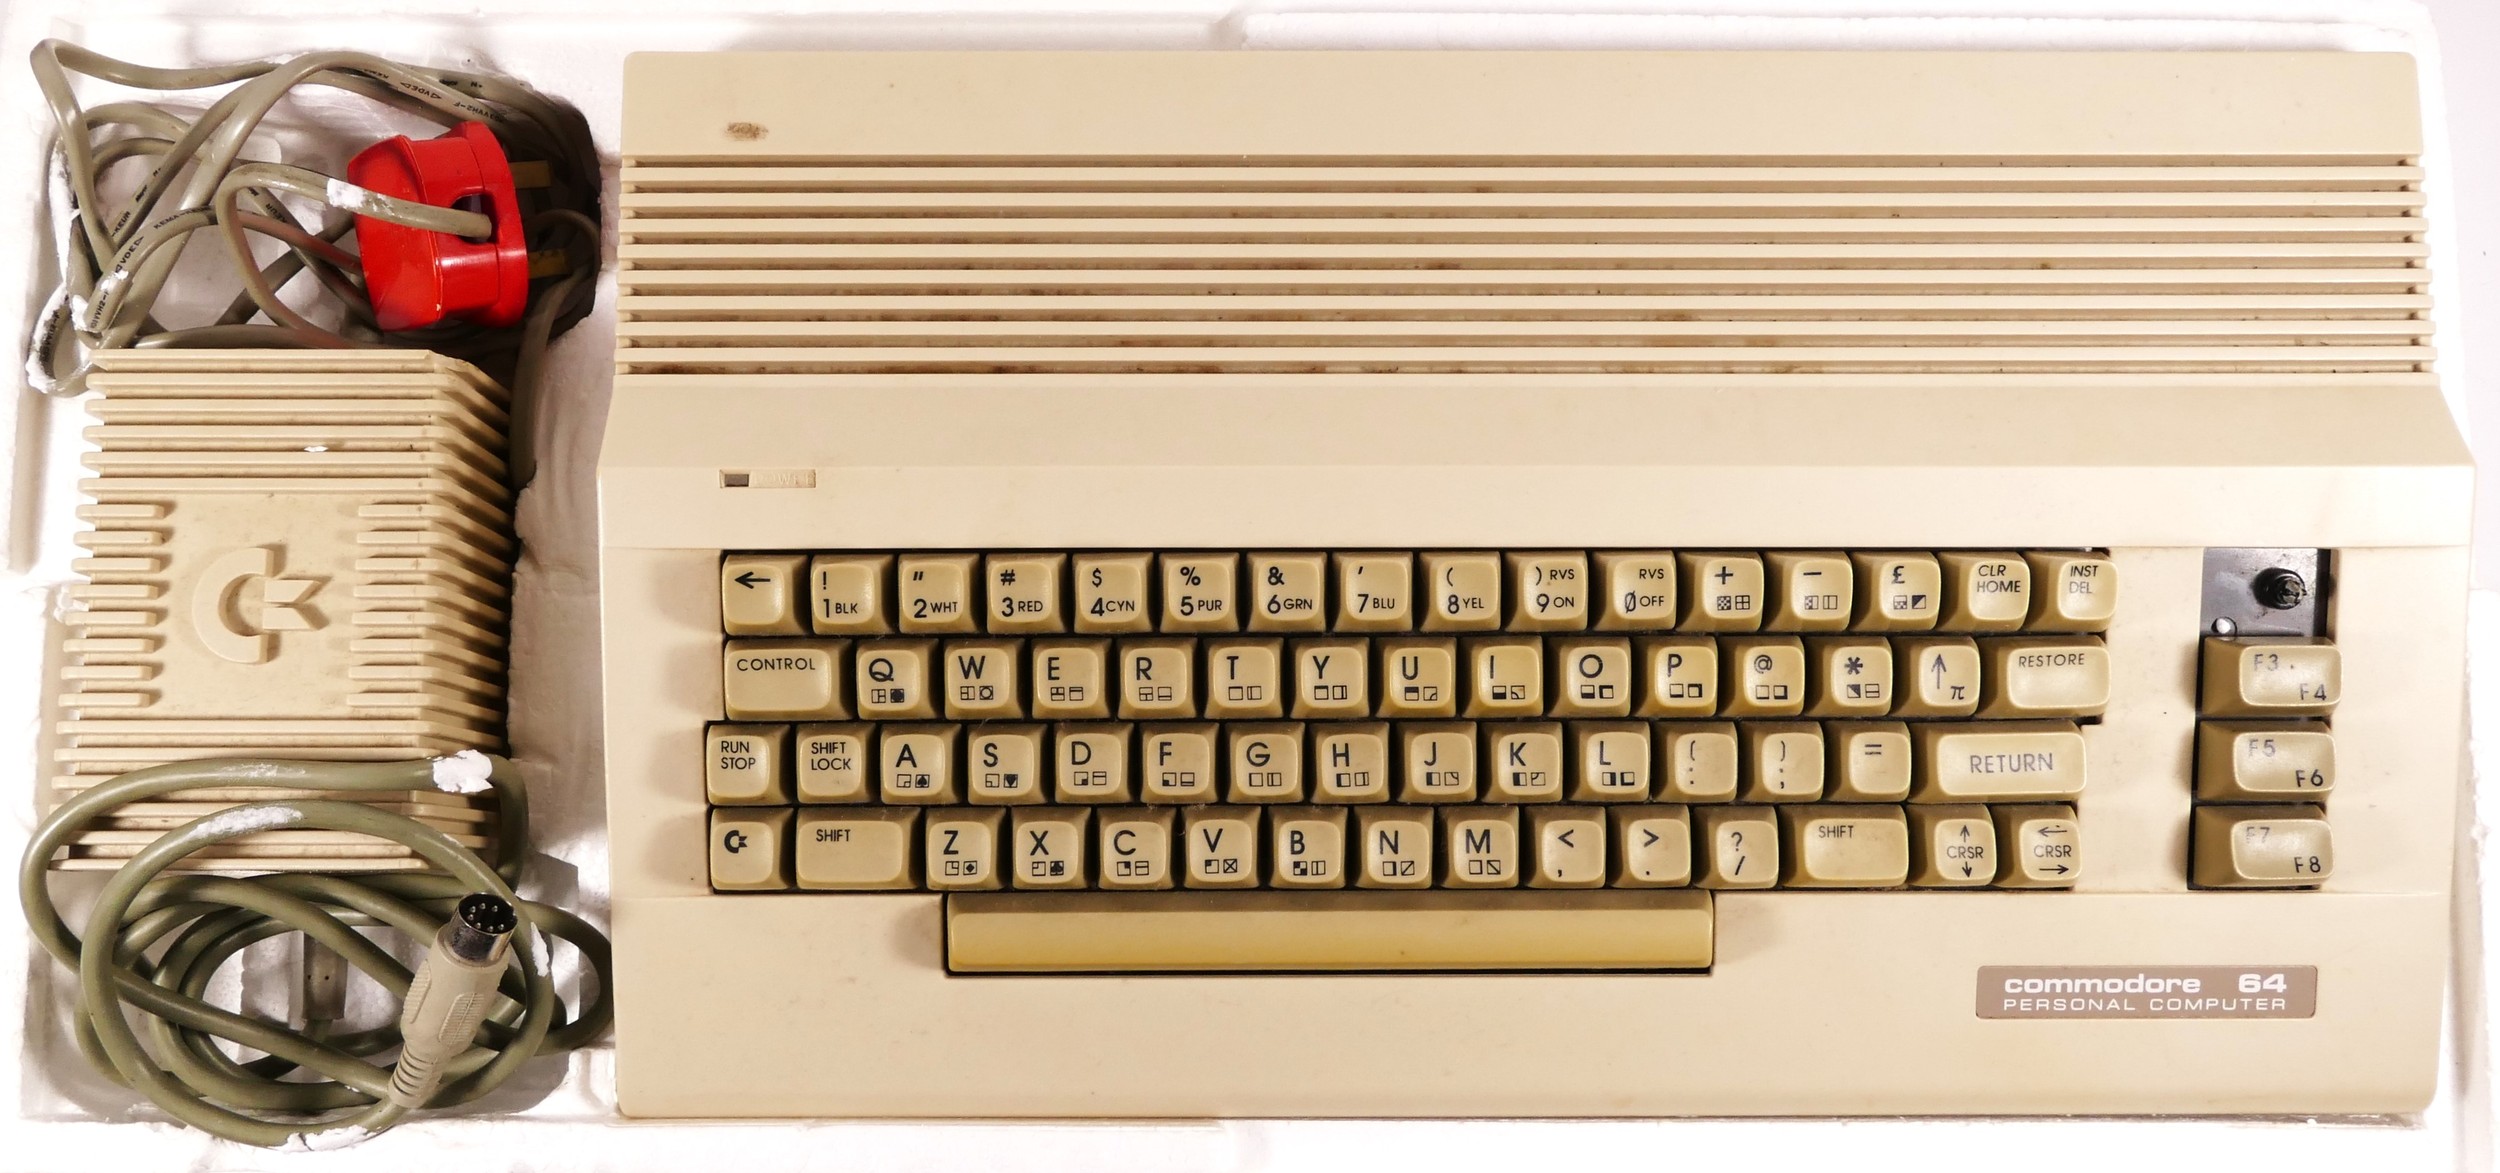 A Commodore 64 personal computer (serial No MB5 062320E), with power lead, original packaging - Image 3 of 3